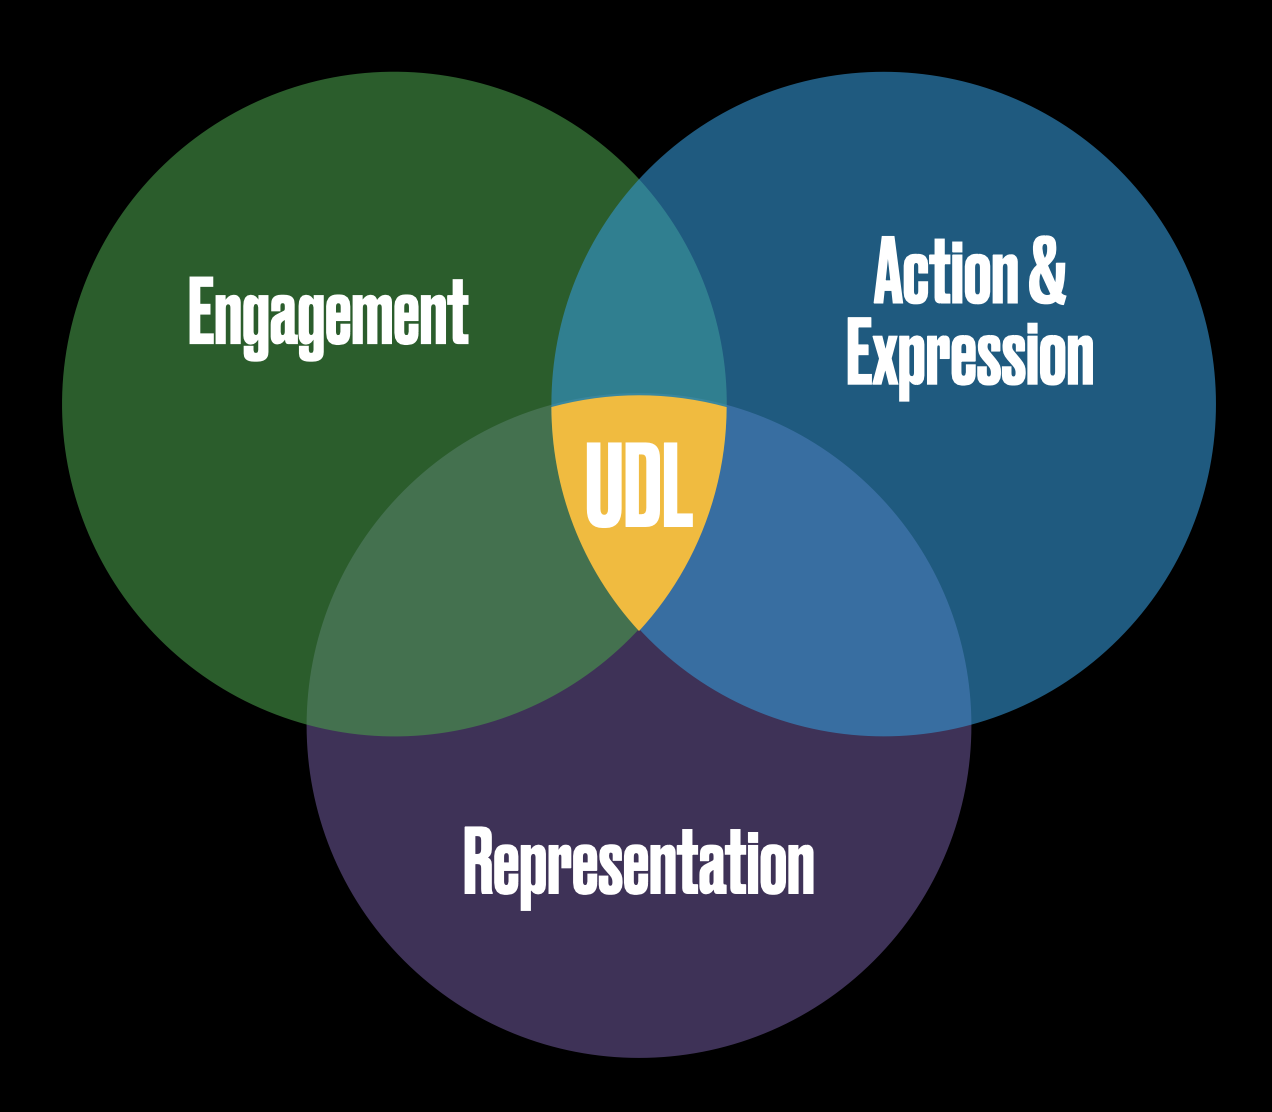 Venn diagram graphic of the 3 areas of Universal Design for Learning (Representation, Action & Expression, and Engagement)